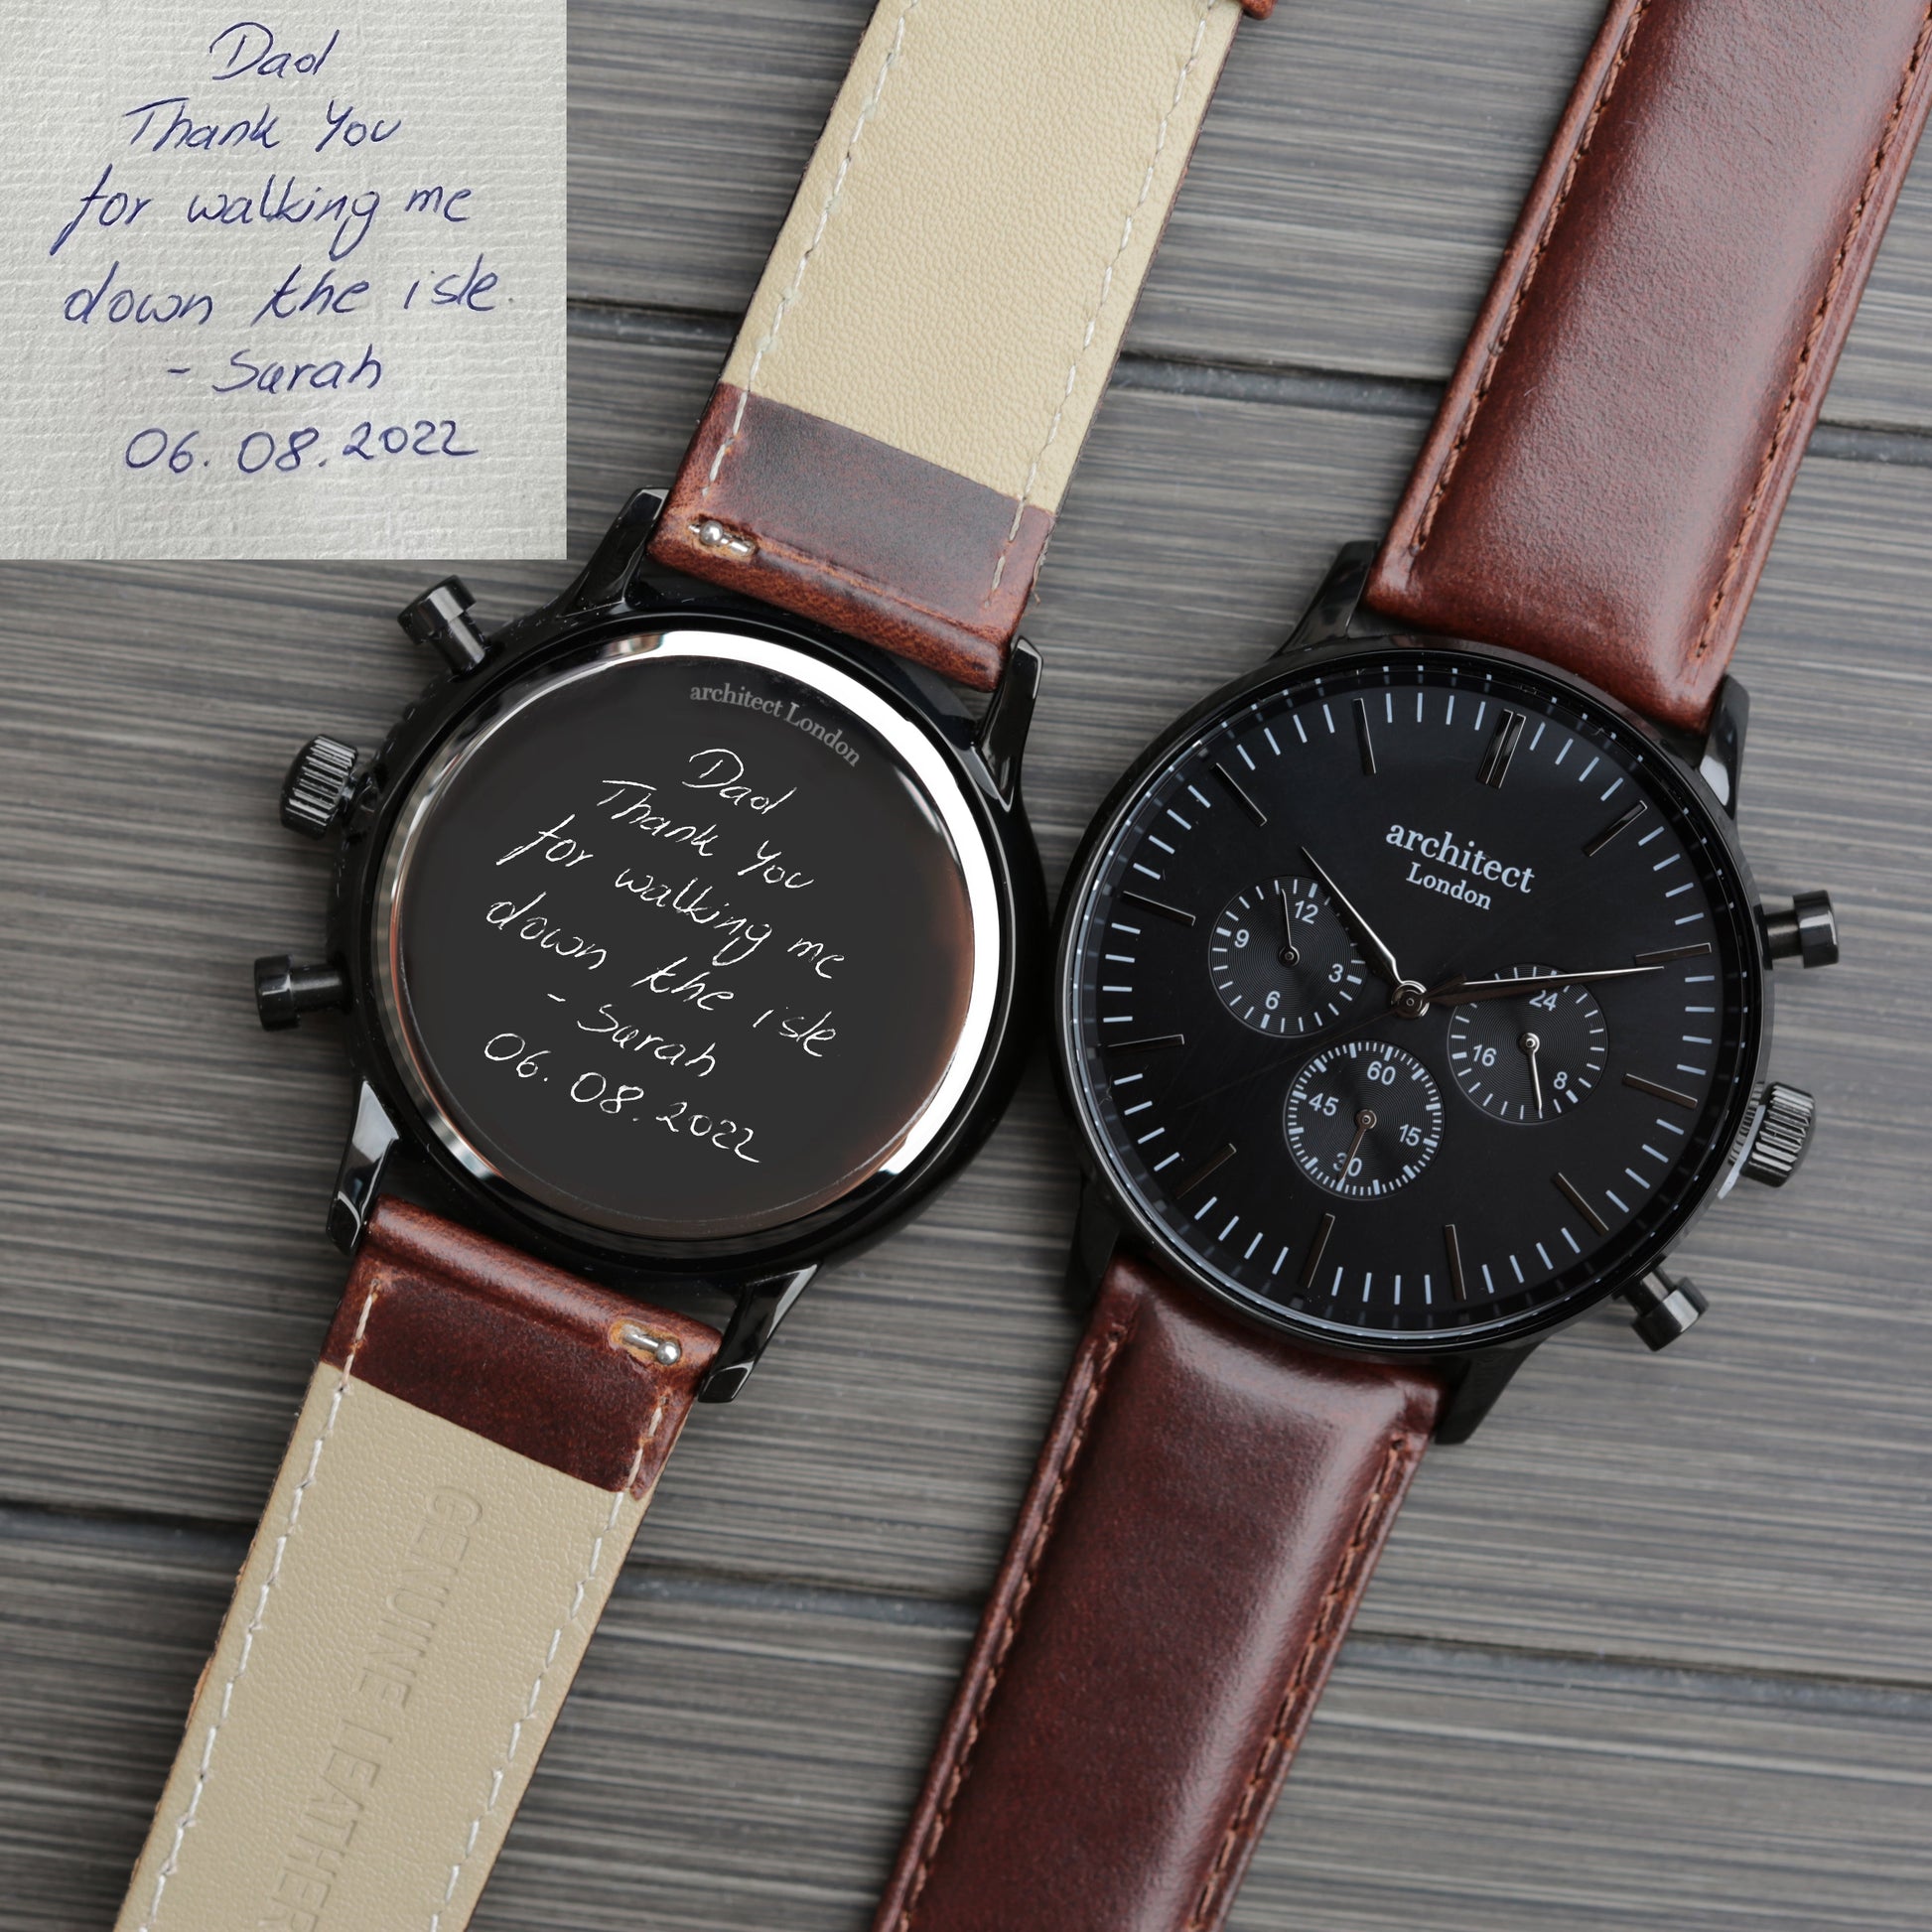 Personalized Men's Watches - Men's Architect Personalized Watch in Black Face Walnut 